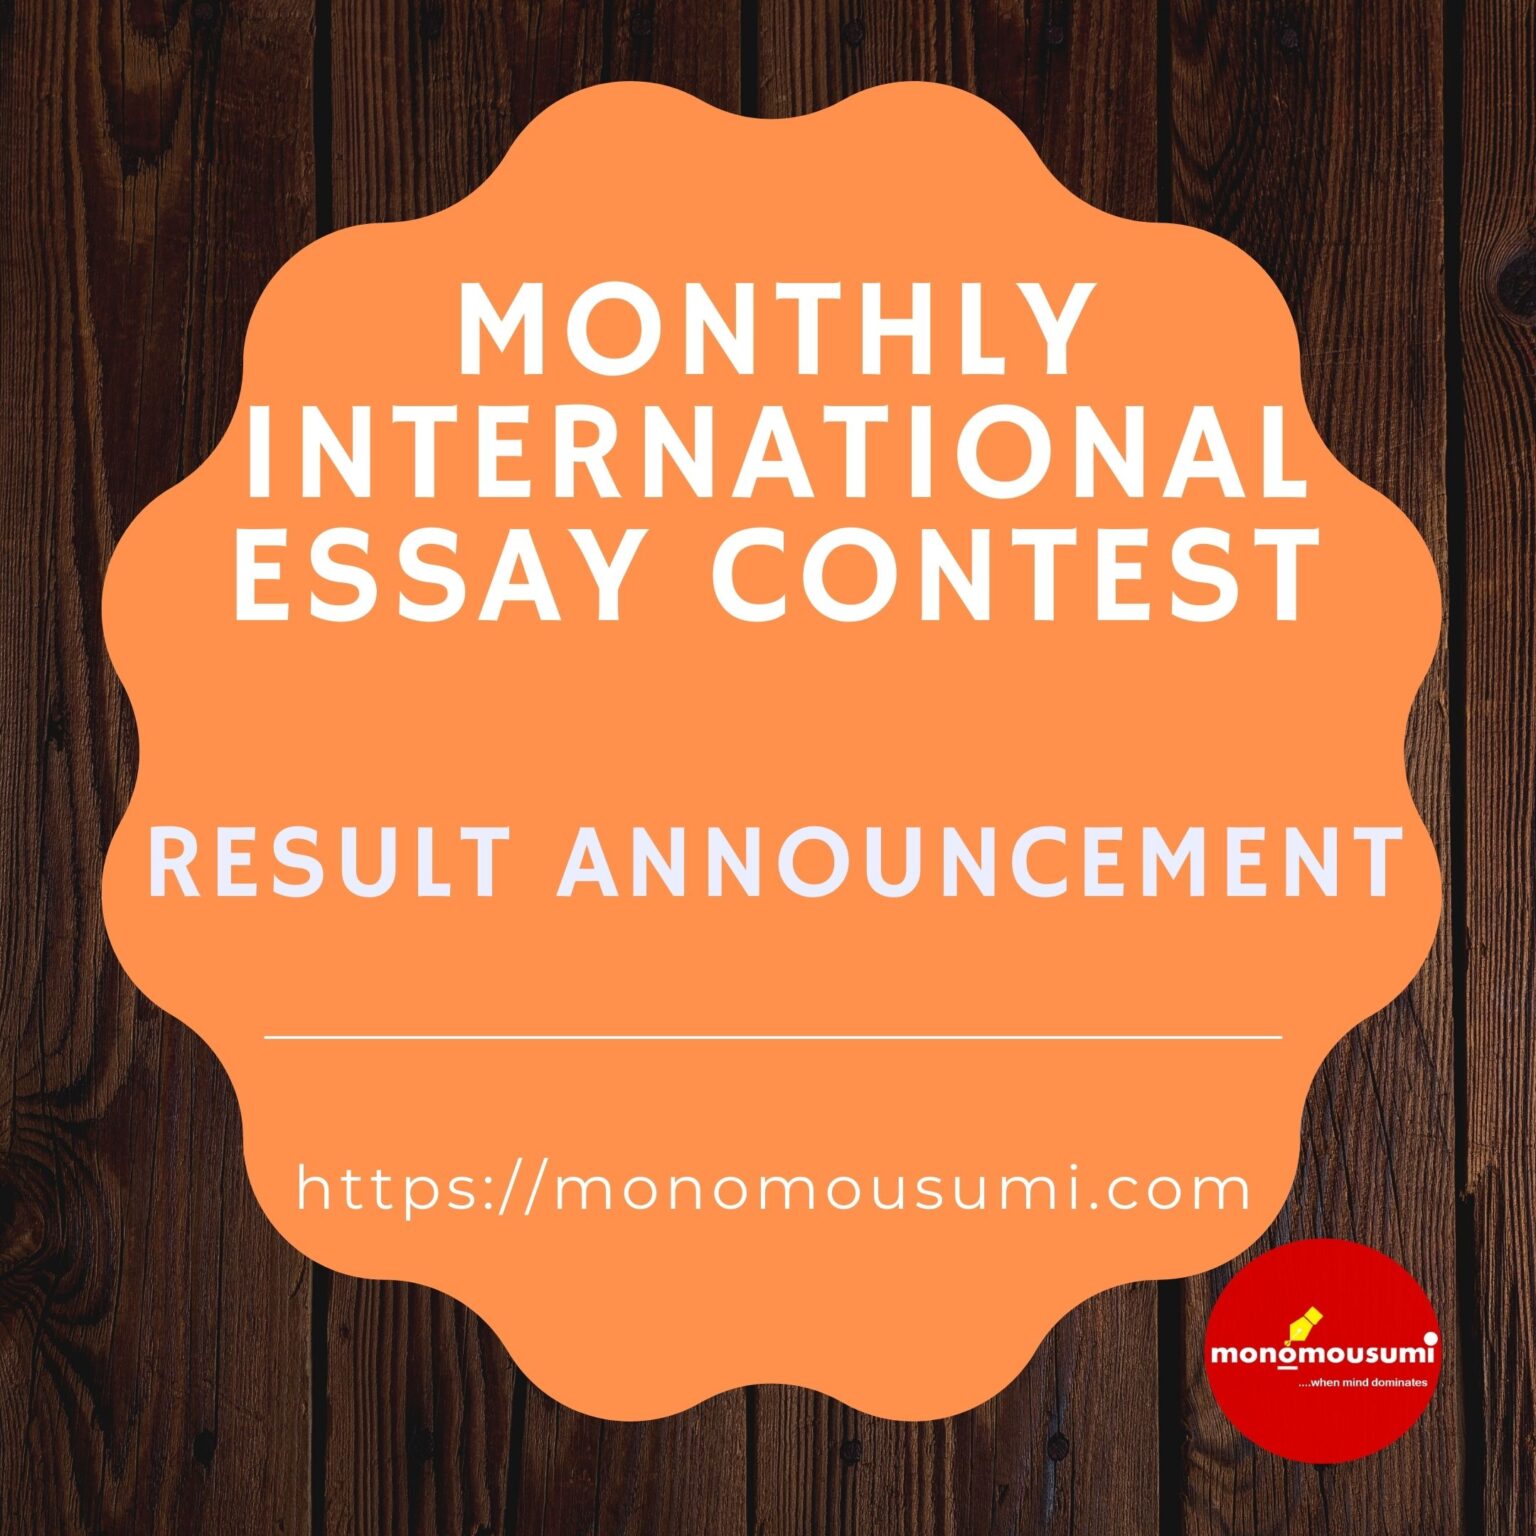 essay competition meaning in bengali